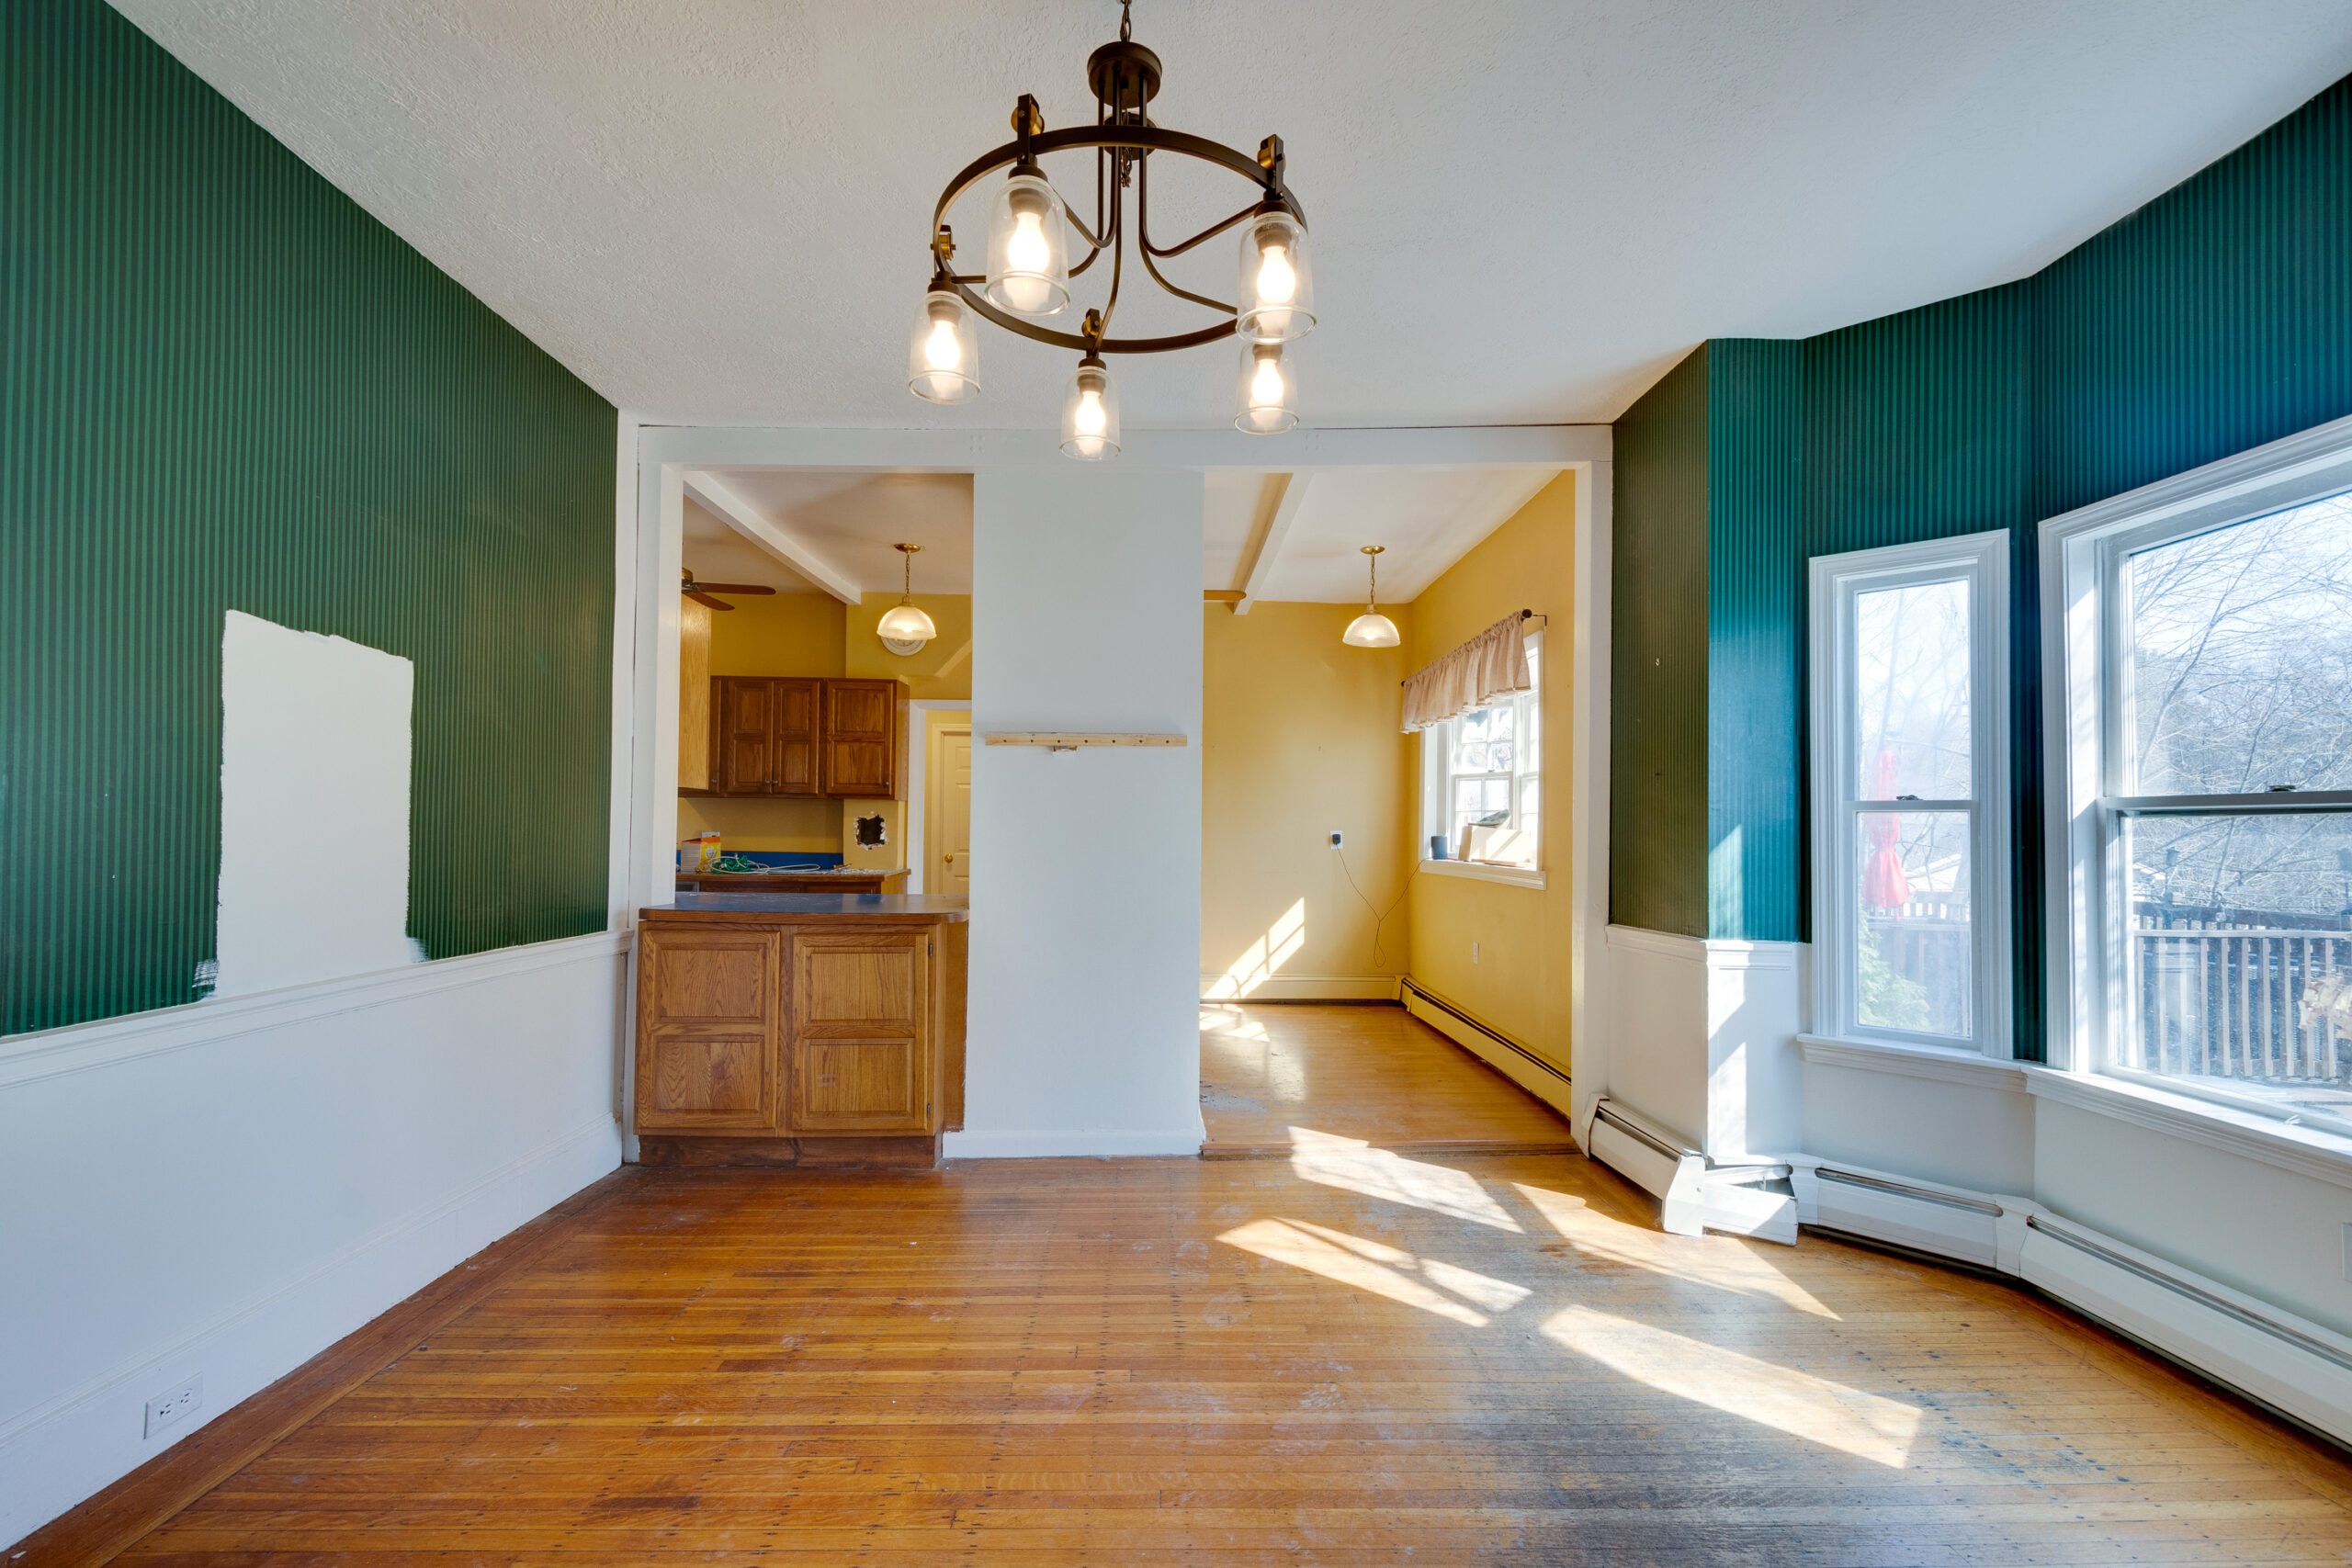 Image of a dining room before renovation in a vintage New England home. The room features outdated green and yellow walls, a dark wood chandelier, and large windows letting in natural light. The hardwood floors are scuffed, and there is a visible patch on the green wall, indicating the beginning of the renovation process.